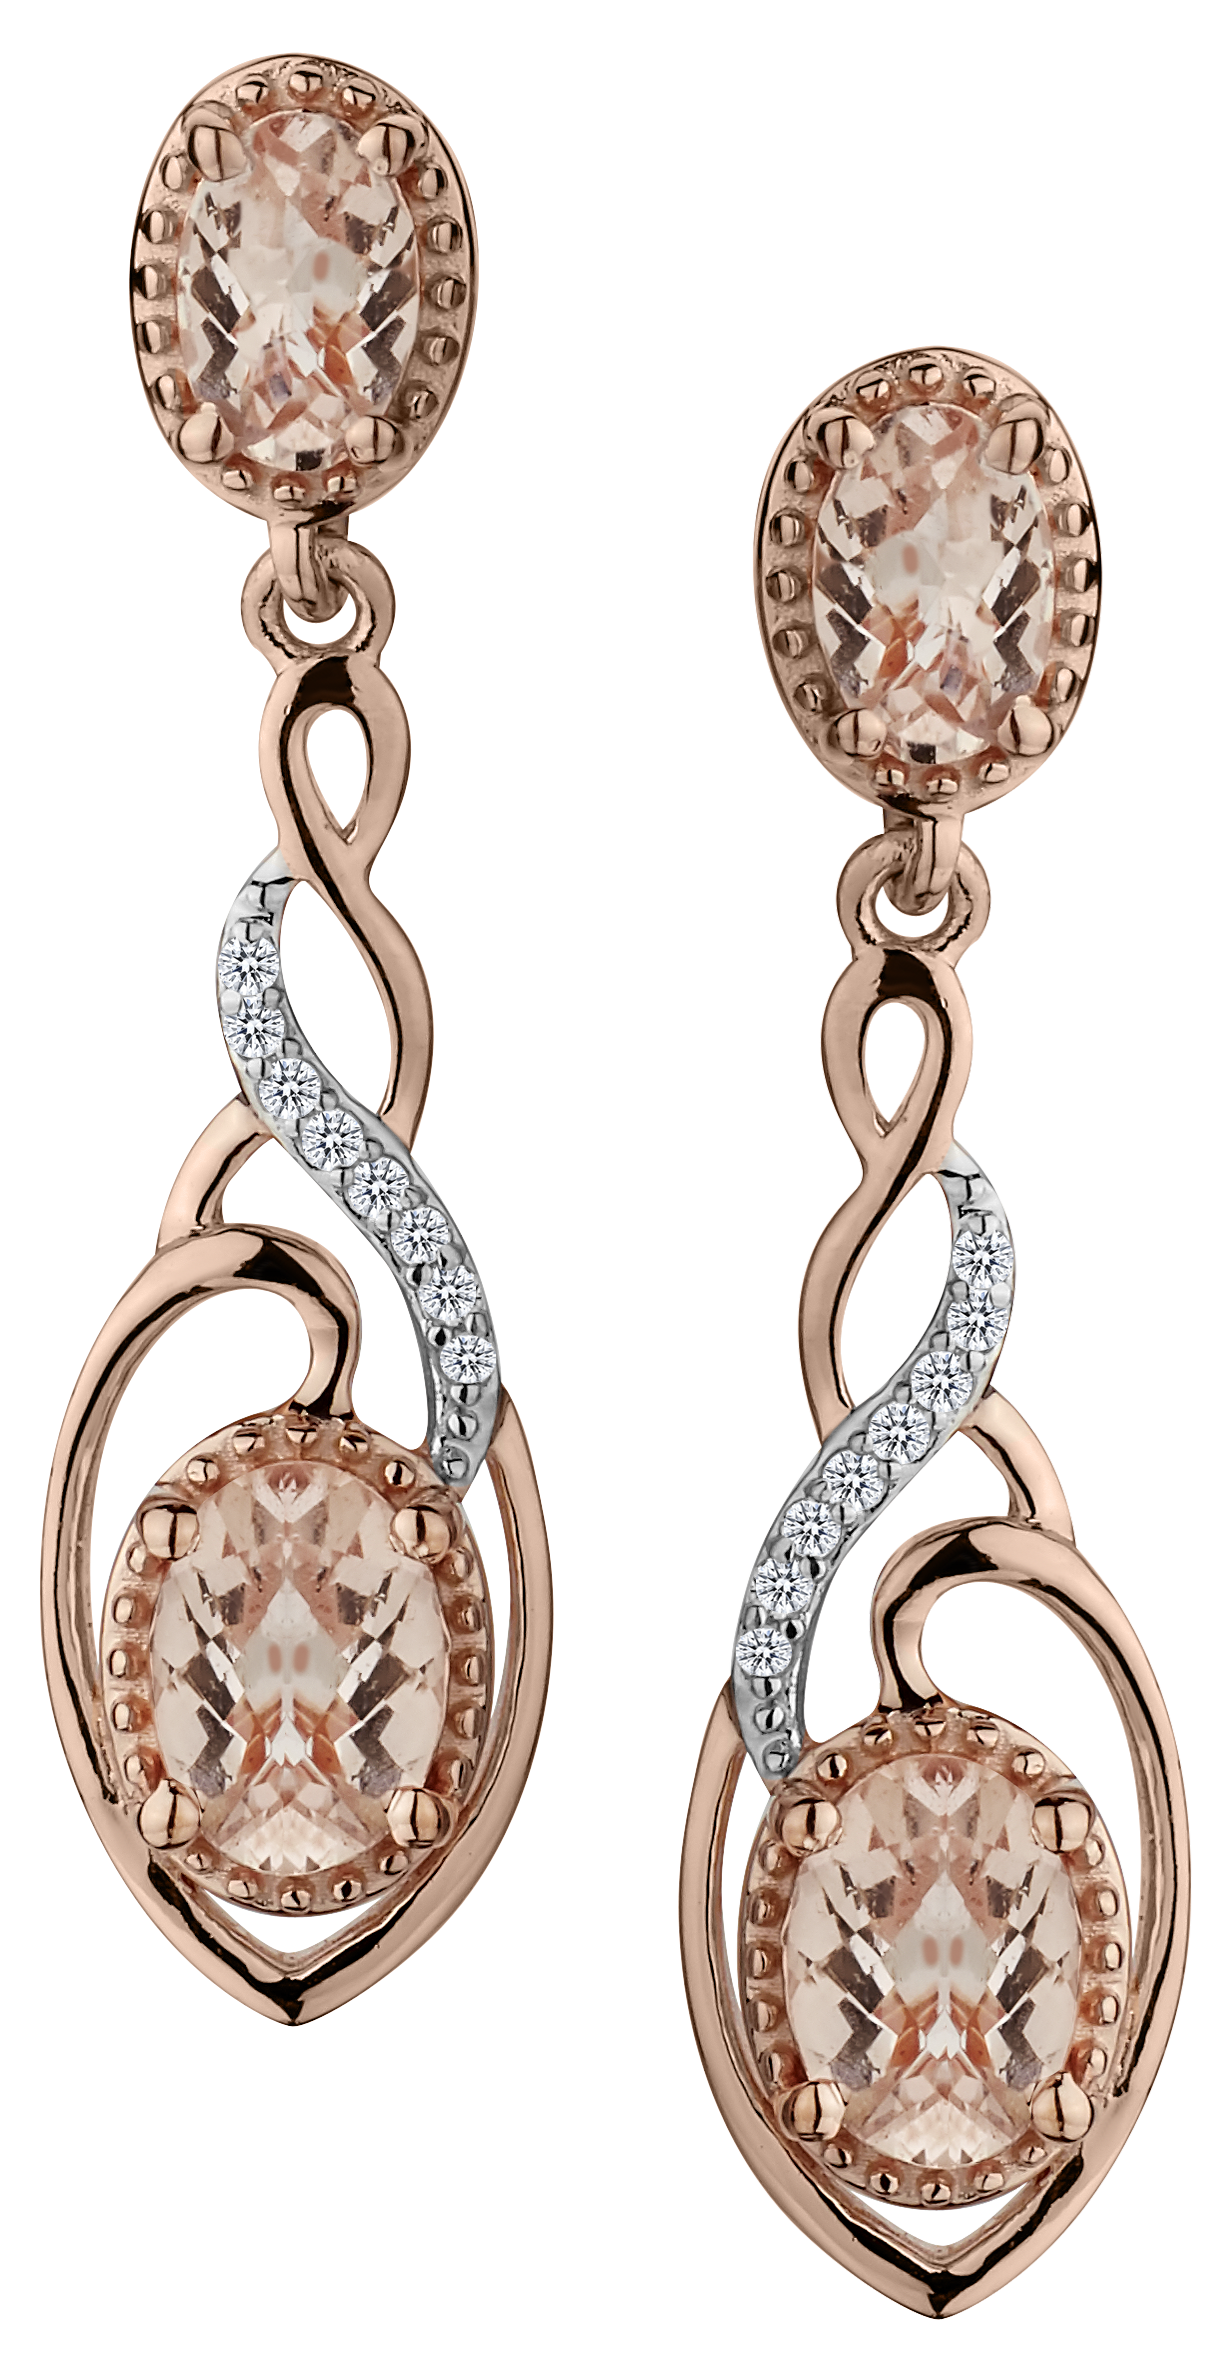 2.44 Carat Genuine Morganite and White Topaz Earrings,  Sterling Silver, Rose Gold Plated. Griffin Jewellery Designs